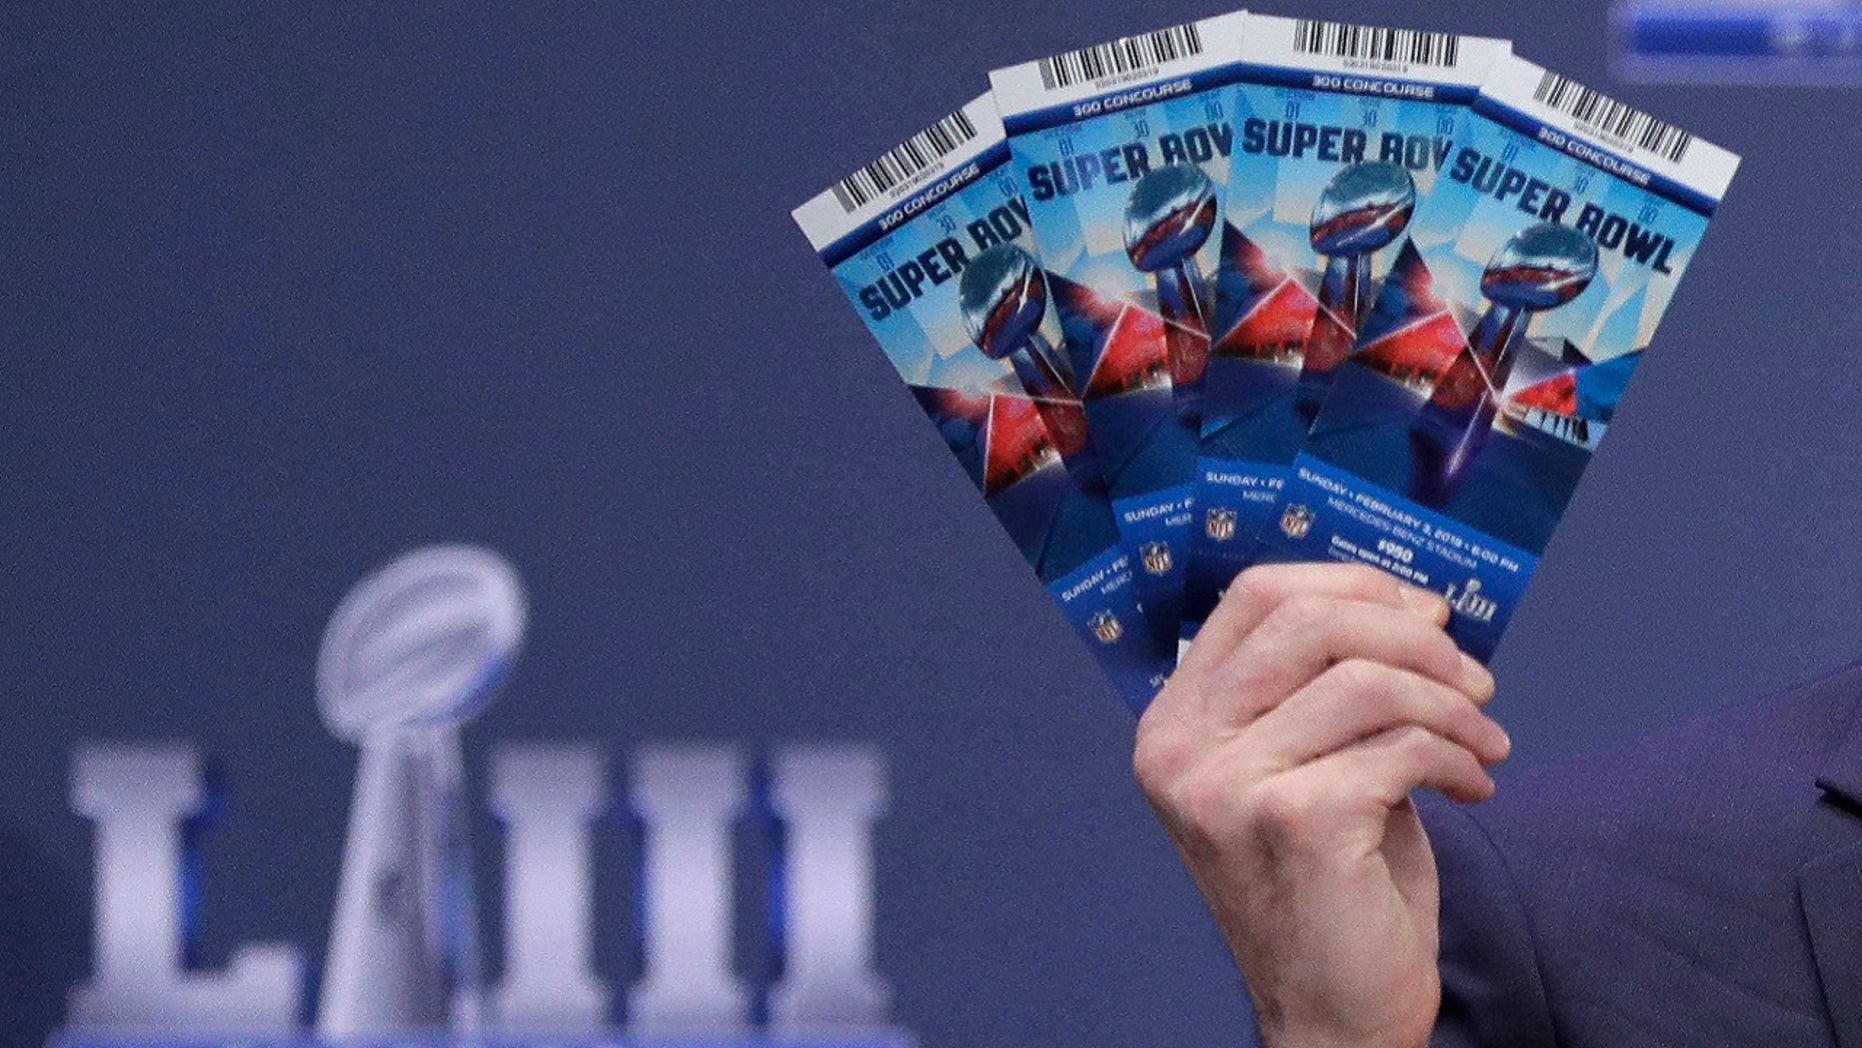 Ex-Microsoft exec pleads guilty to theft, resale of nearly $1M in Super Bowl tickets, authorities say